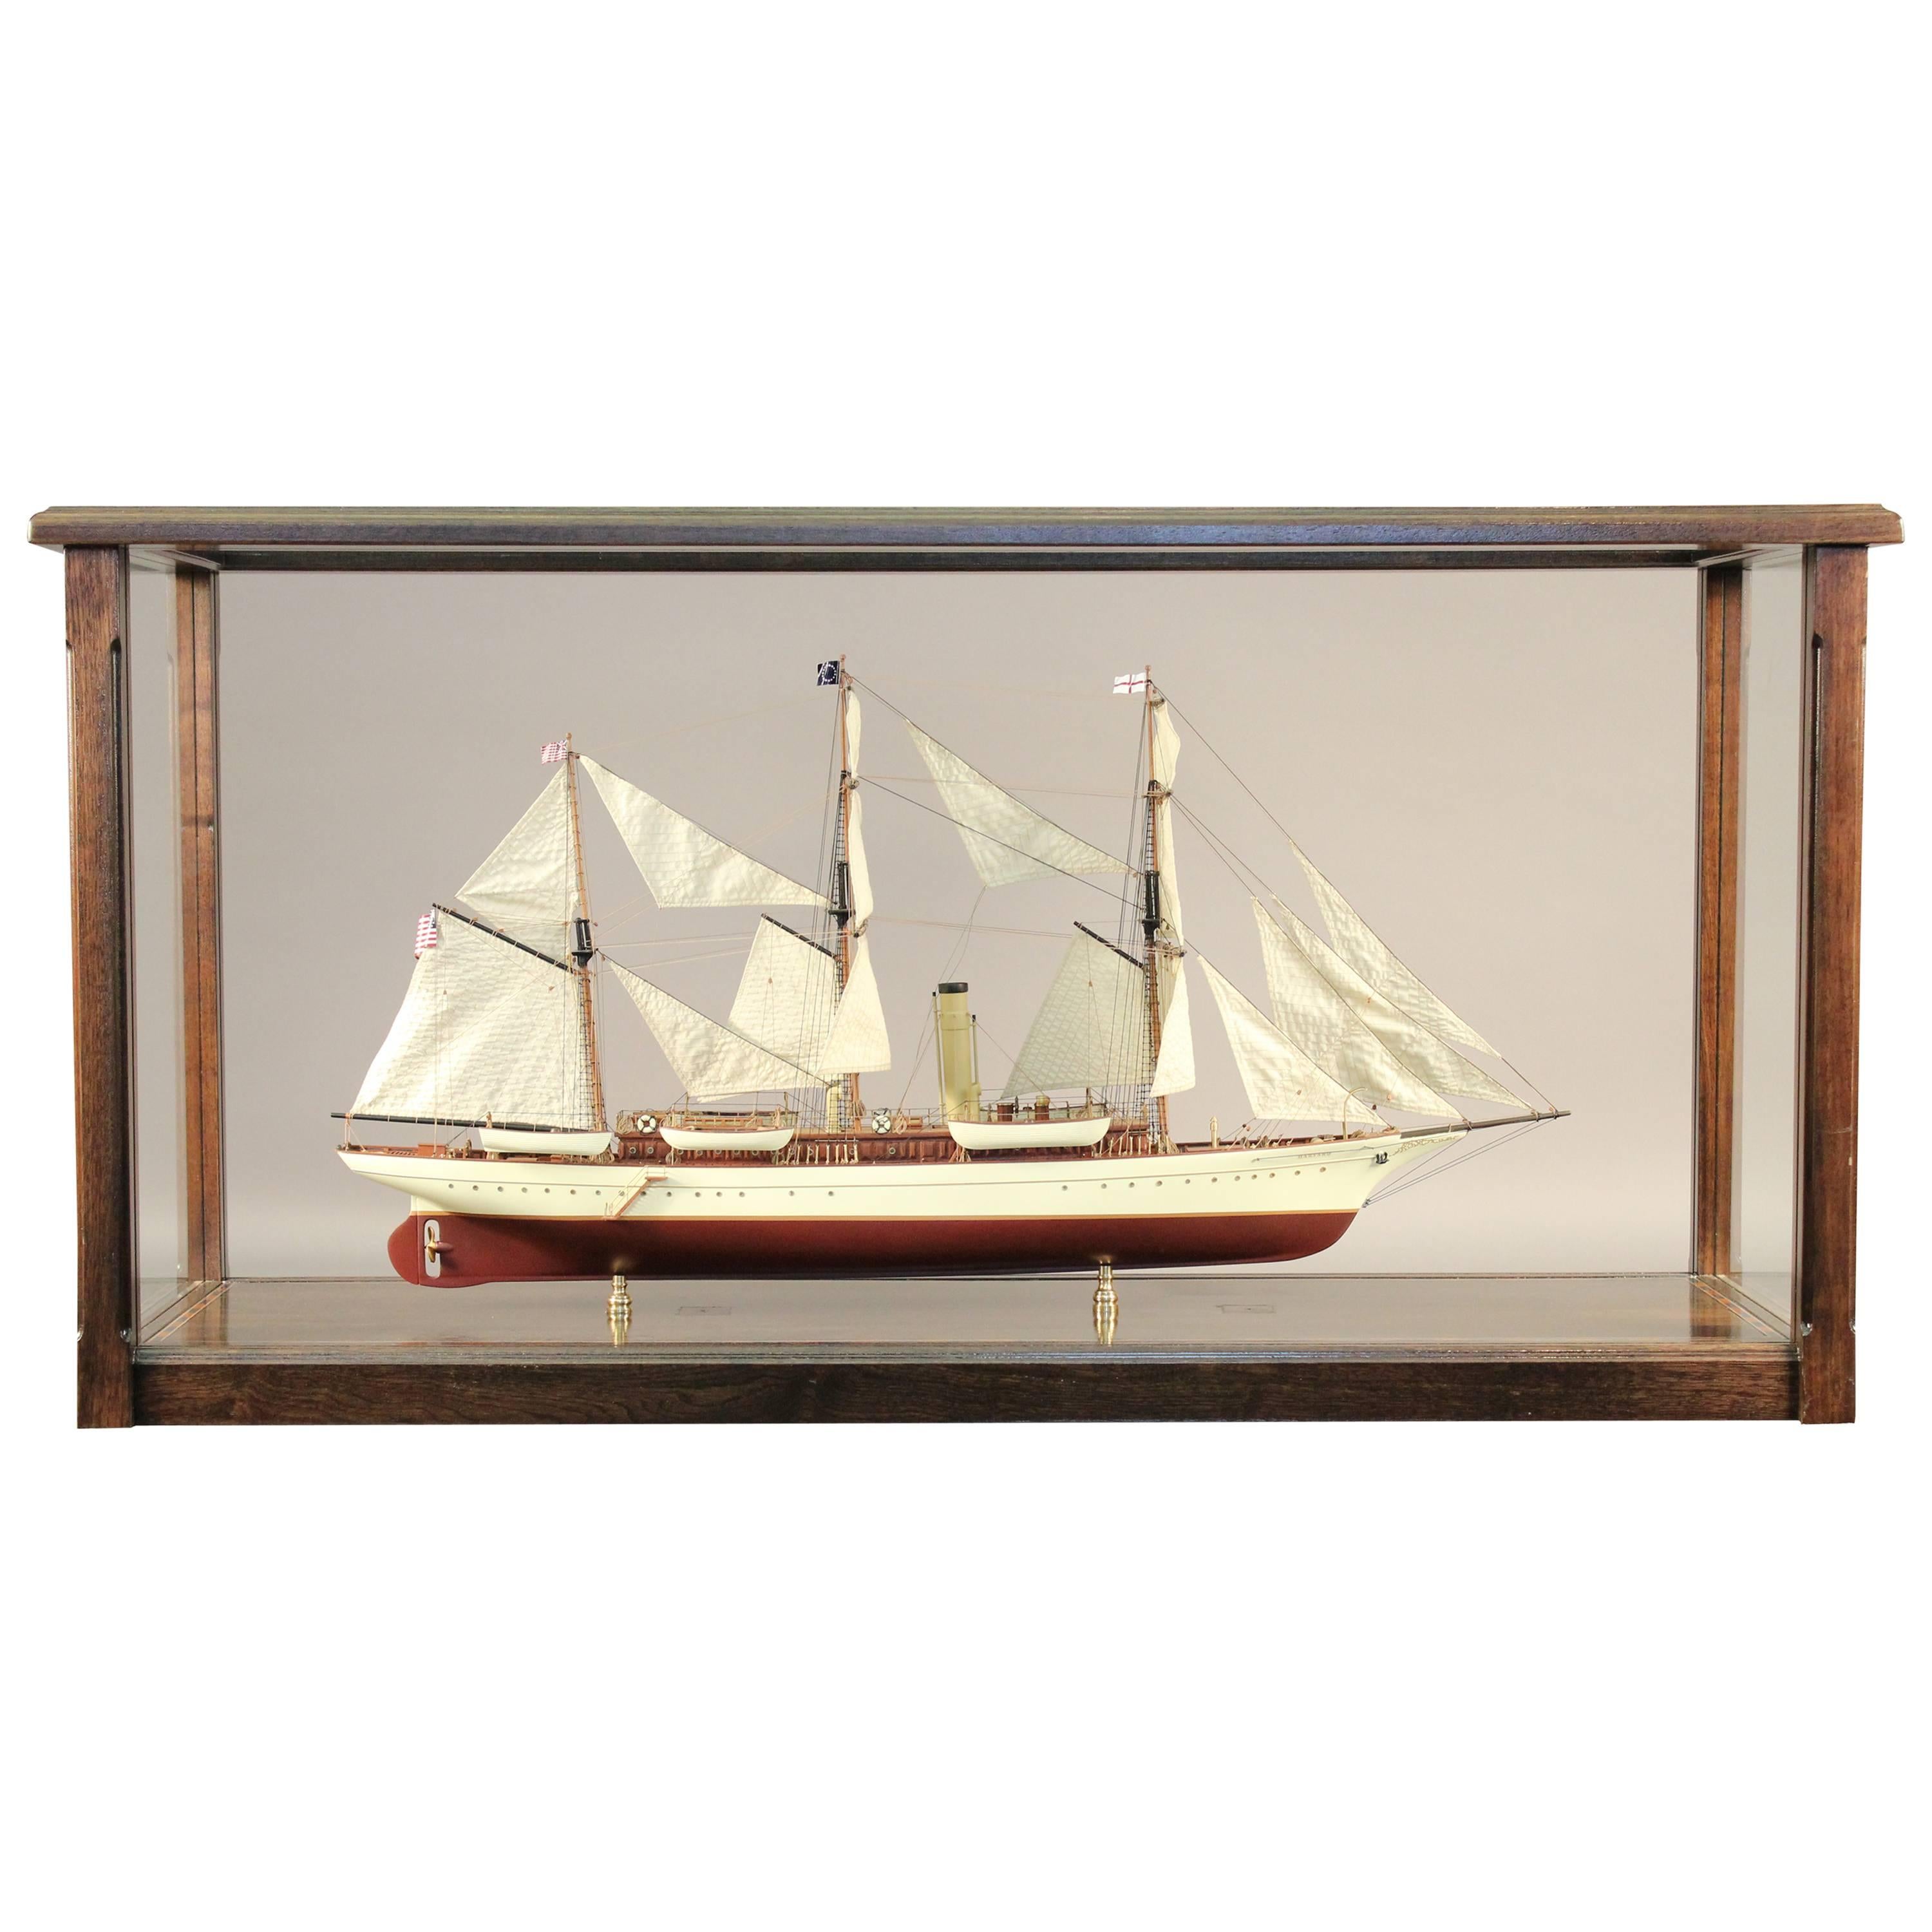 Steam Yacht Model of the "Harvard" For Sale